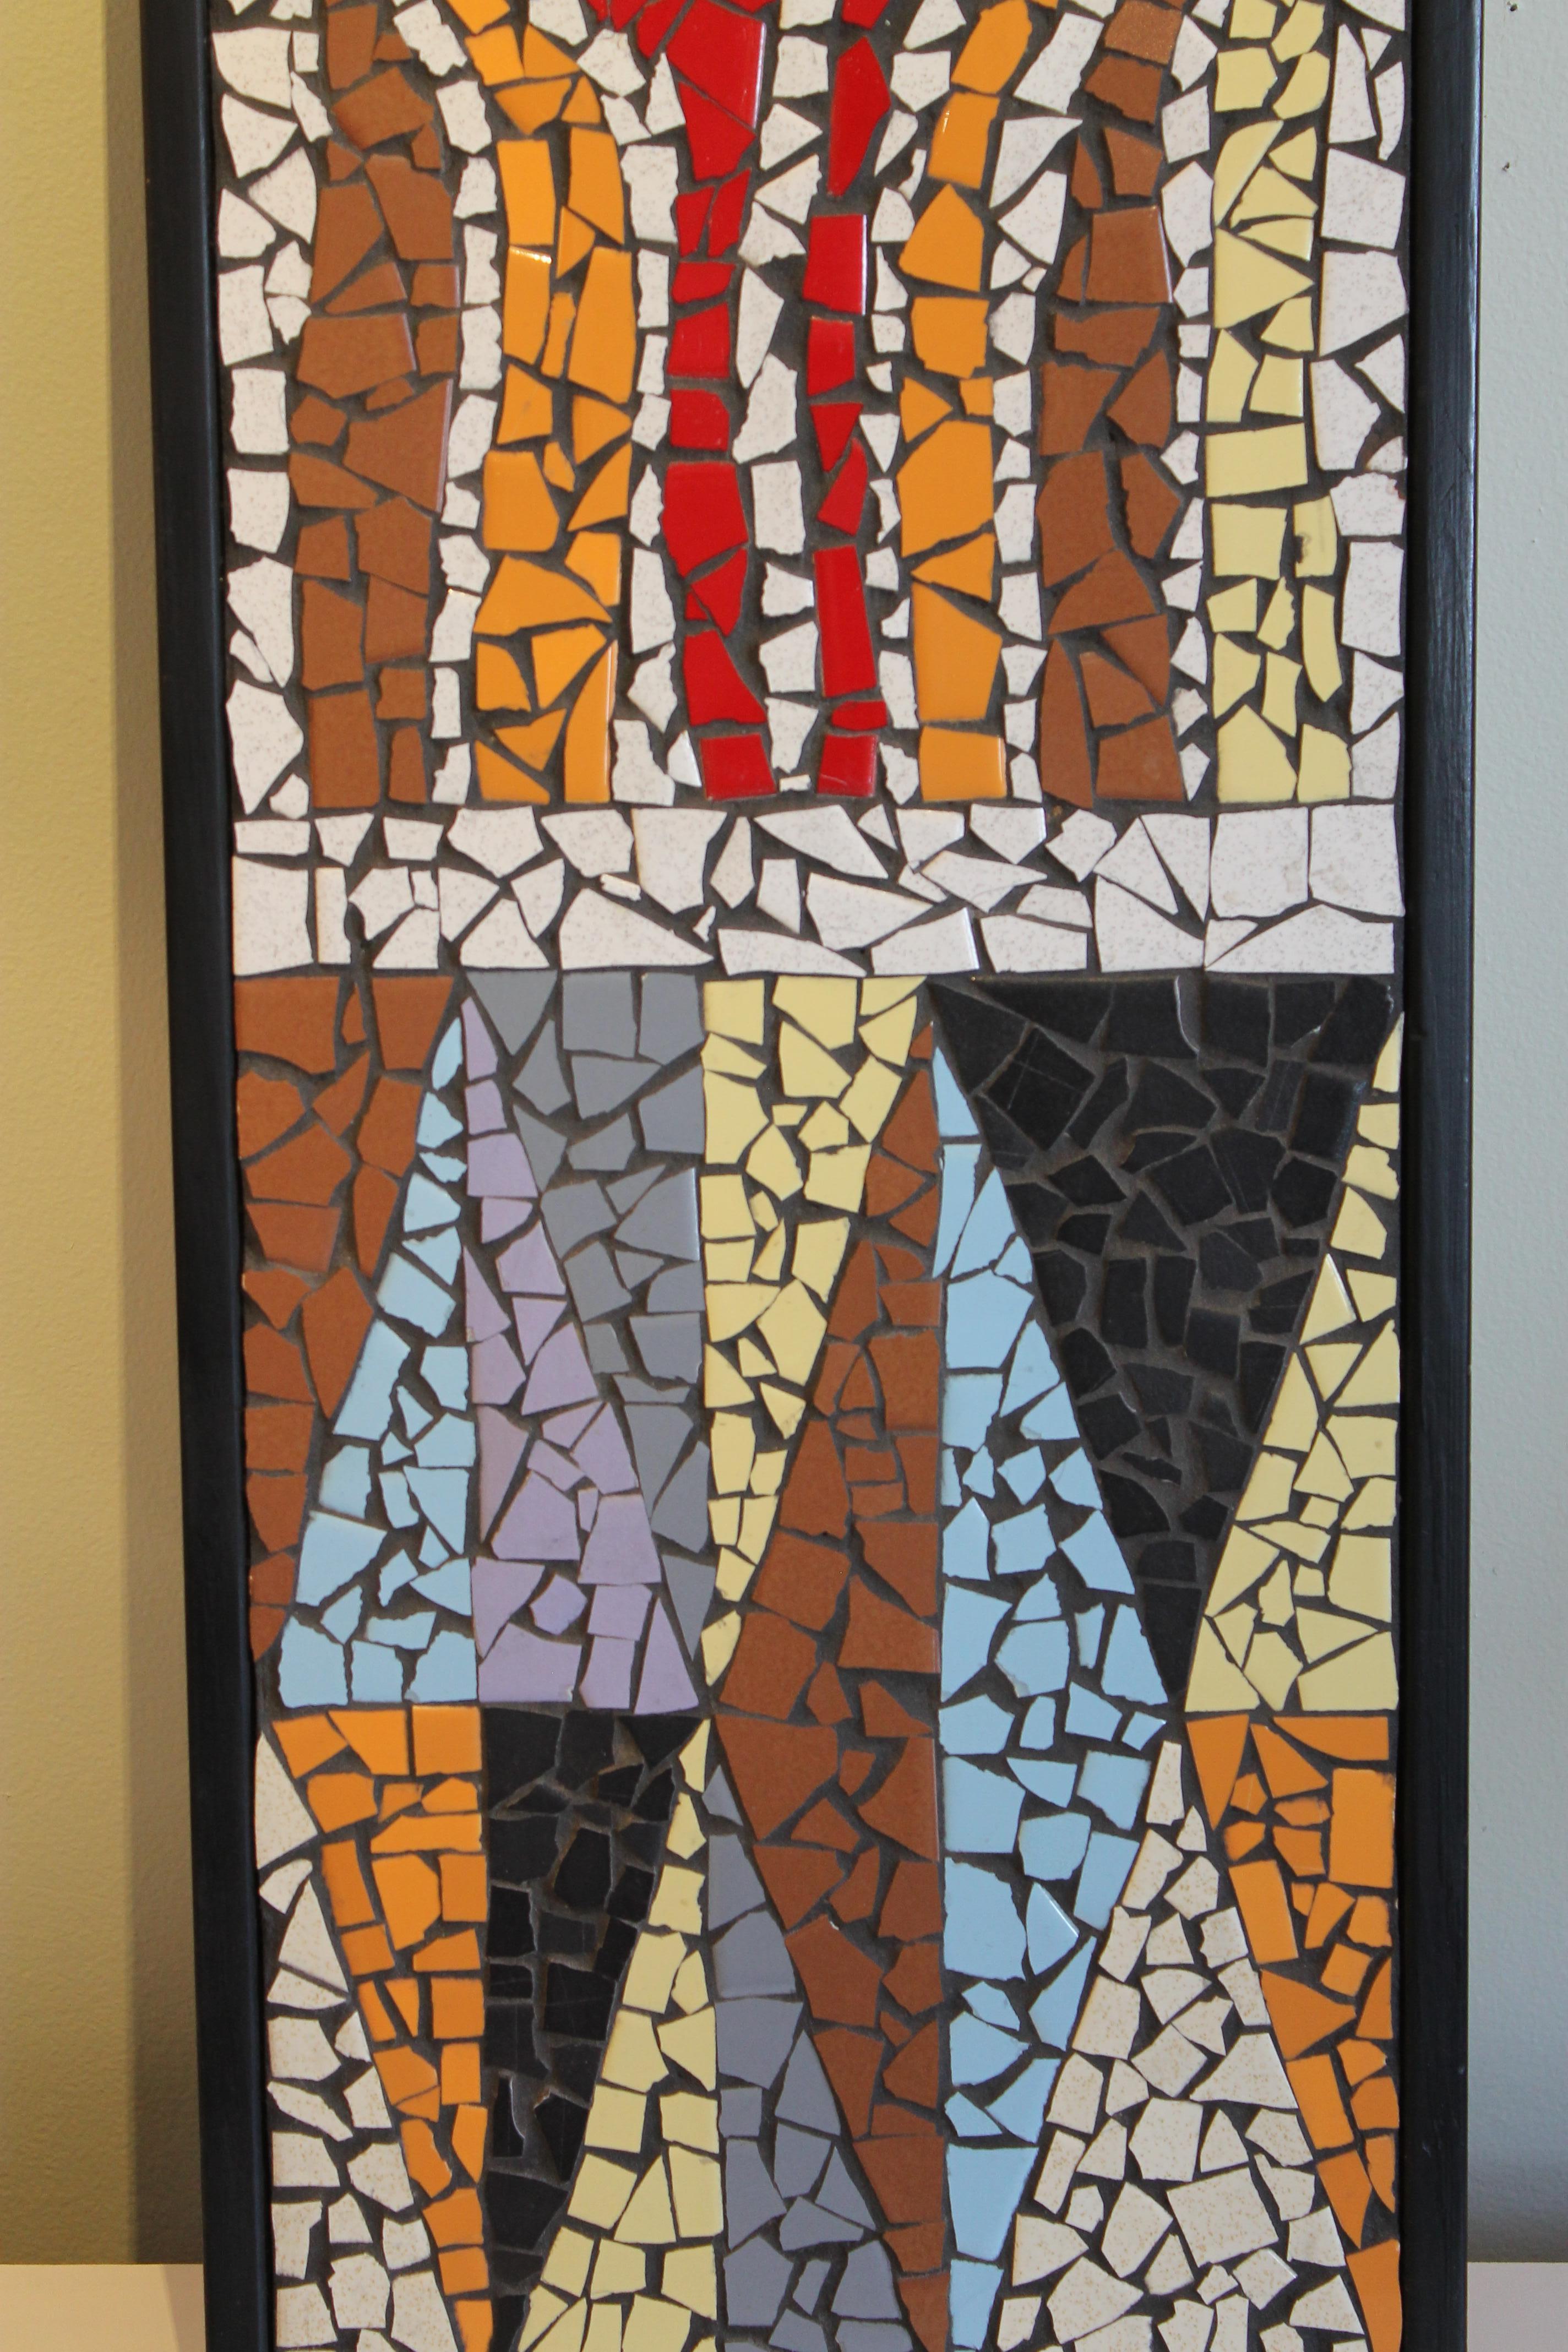 American Mosaic Panel in Style of Evelyn Ackerman